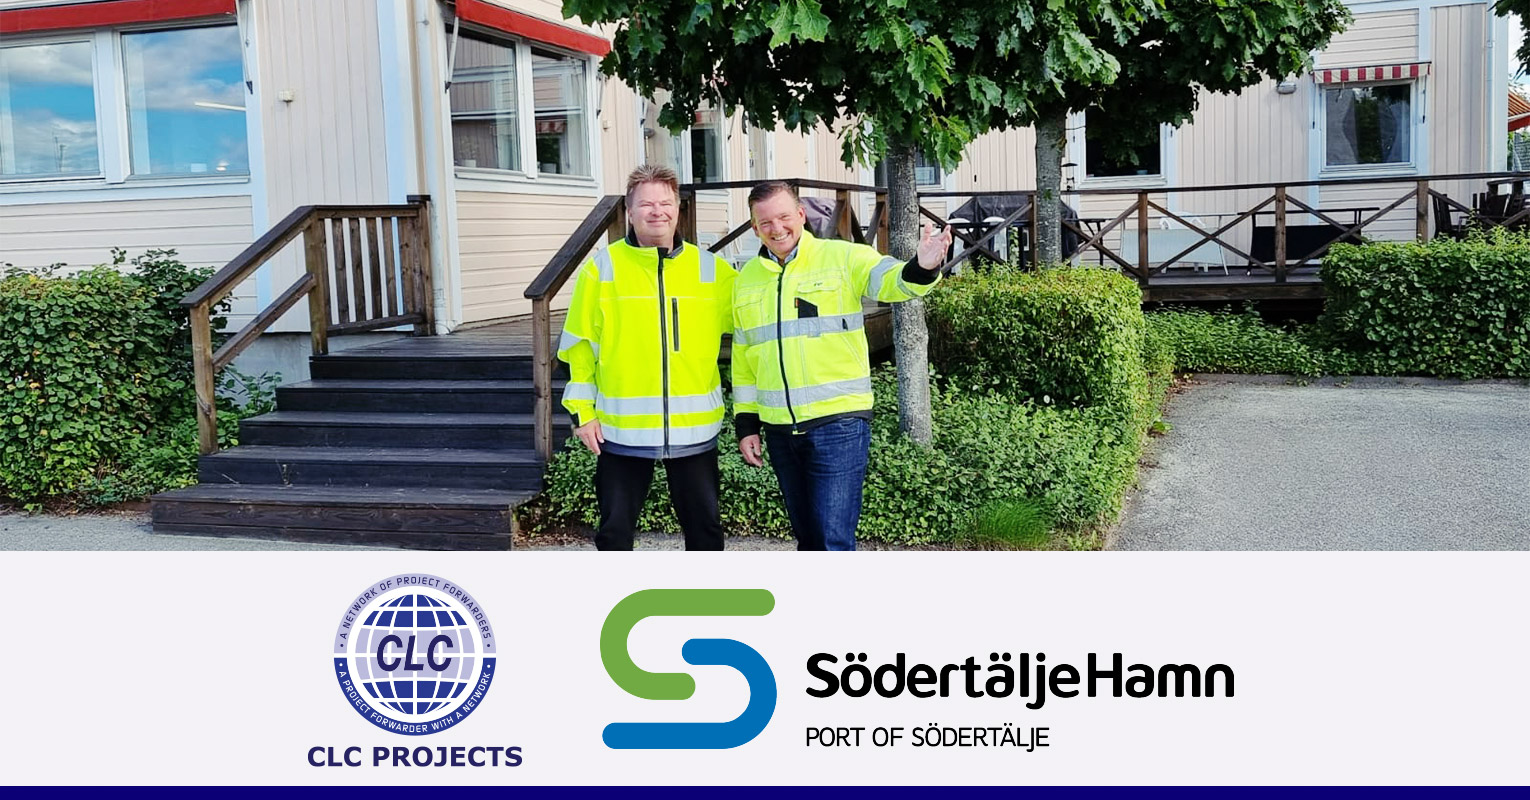 CLC Projects and acting CEO of Port of Södertälje